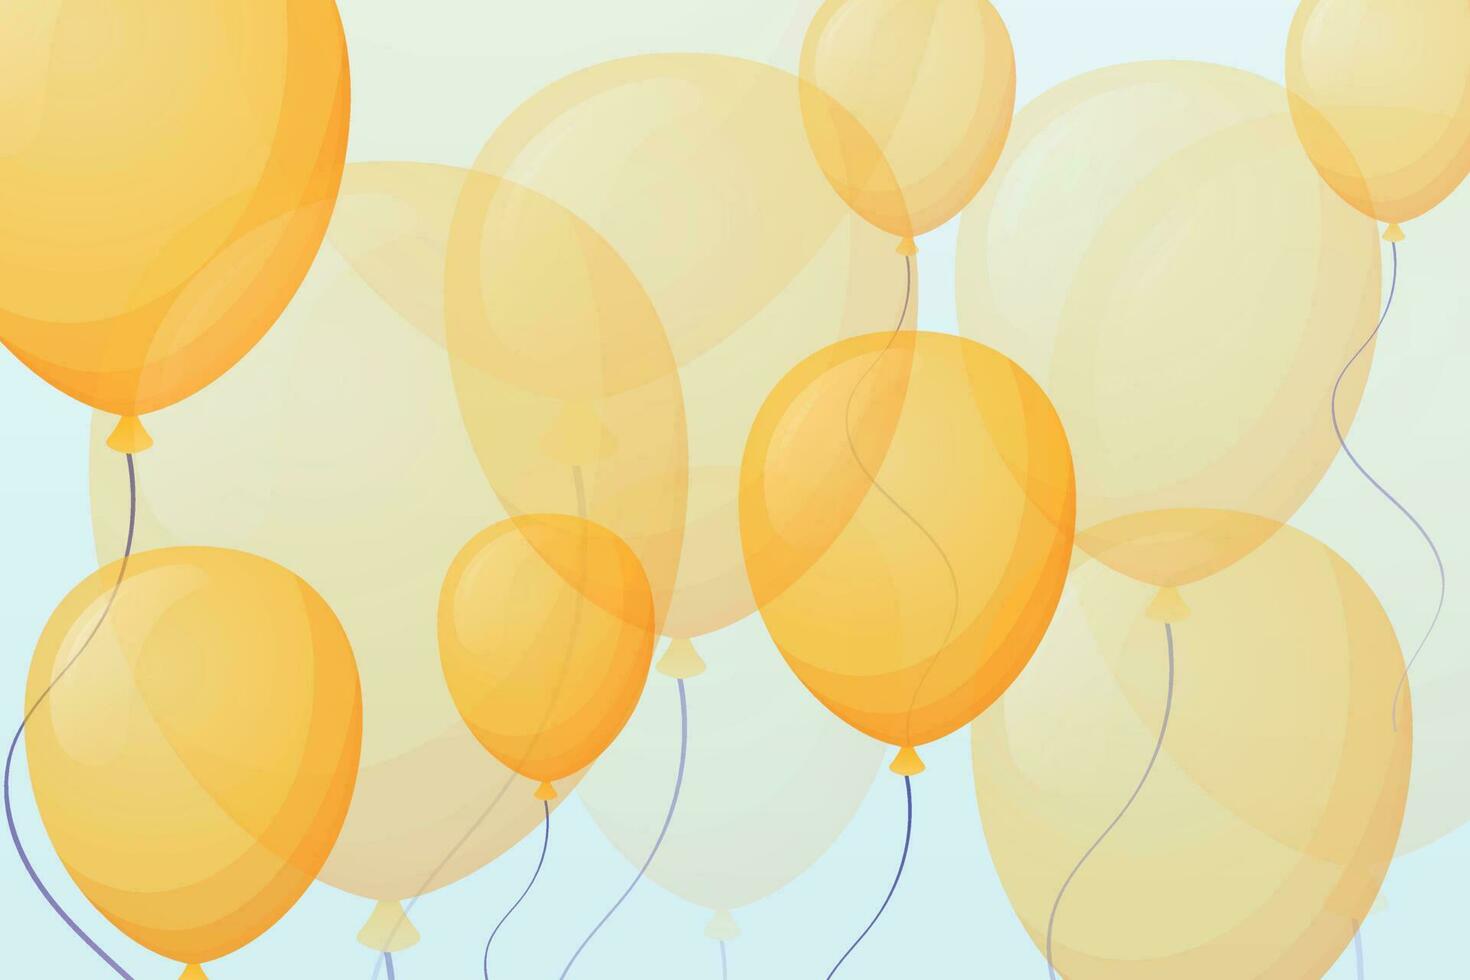 Abstract vector horizontal holiday background with yellow balloons.